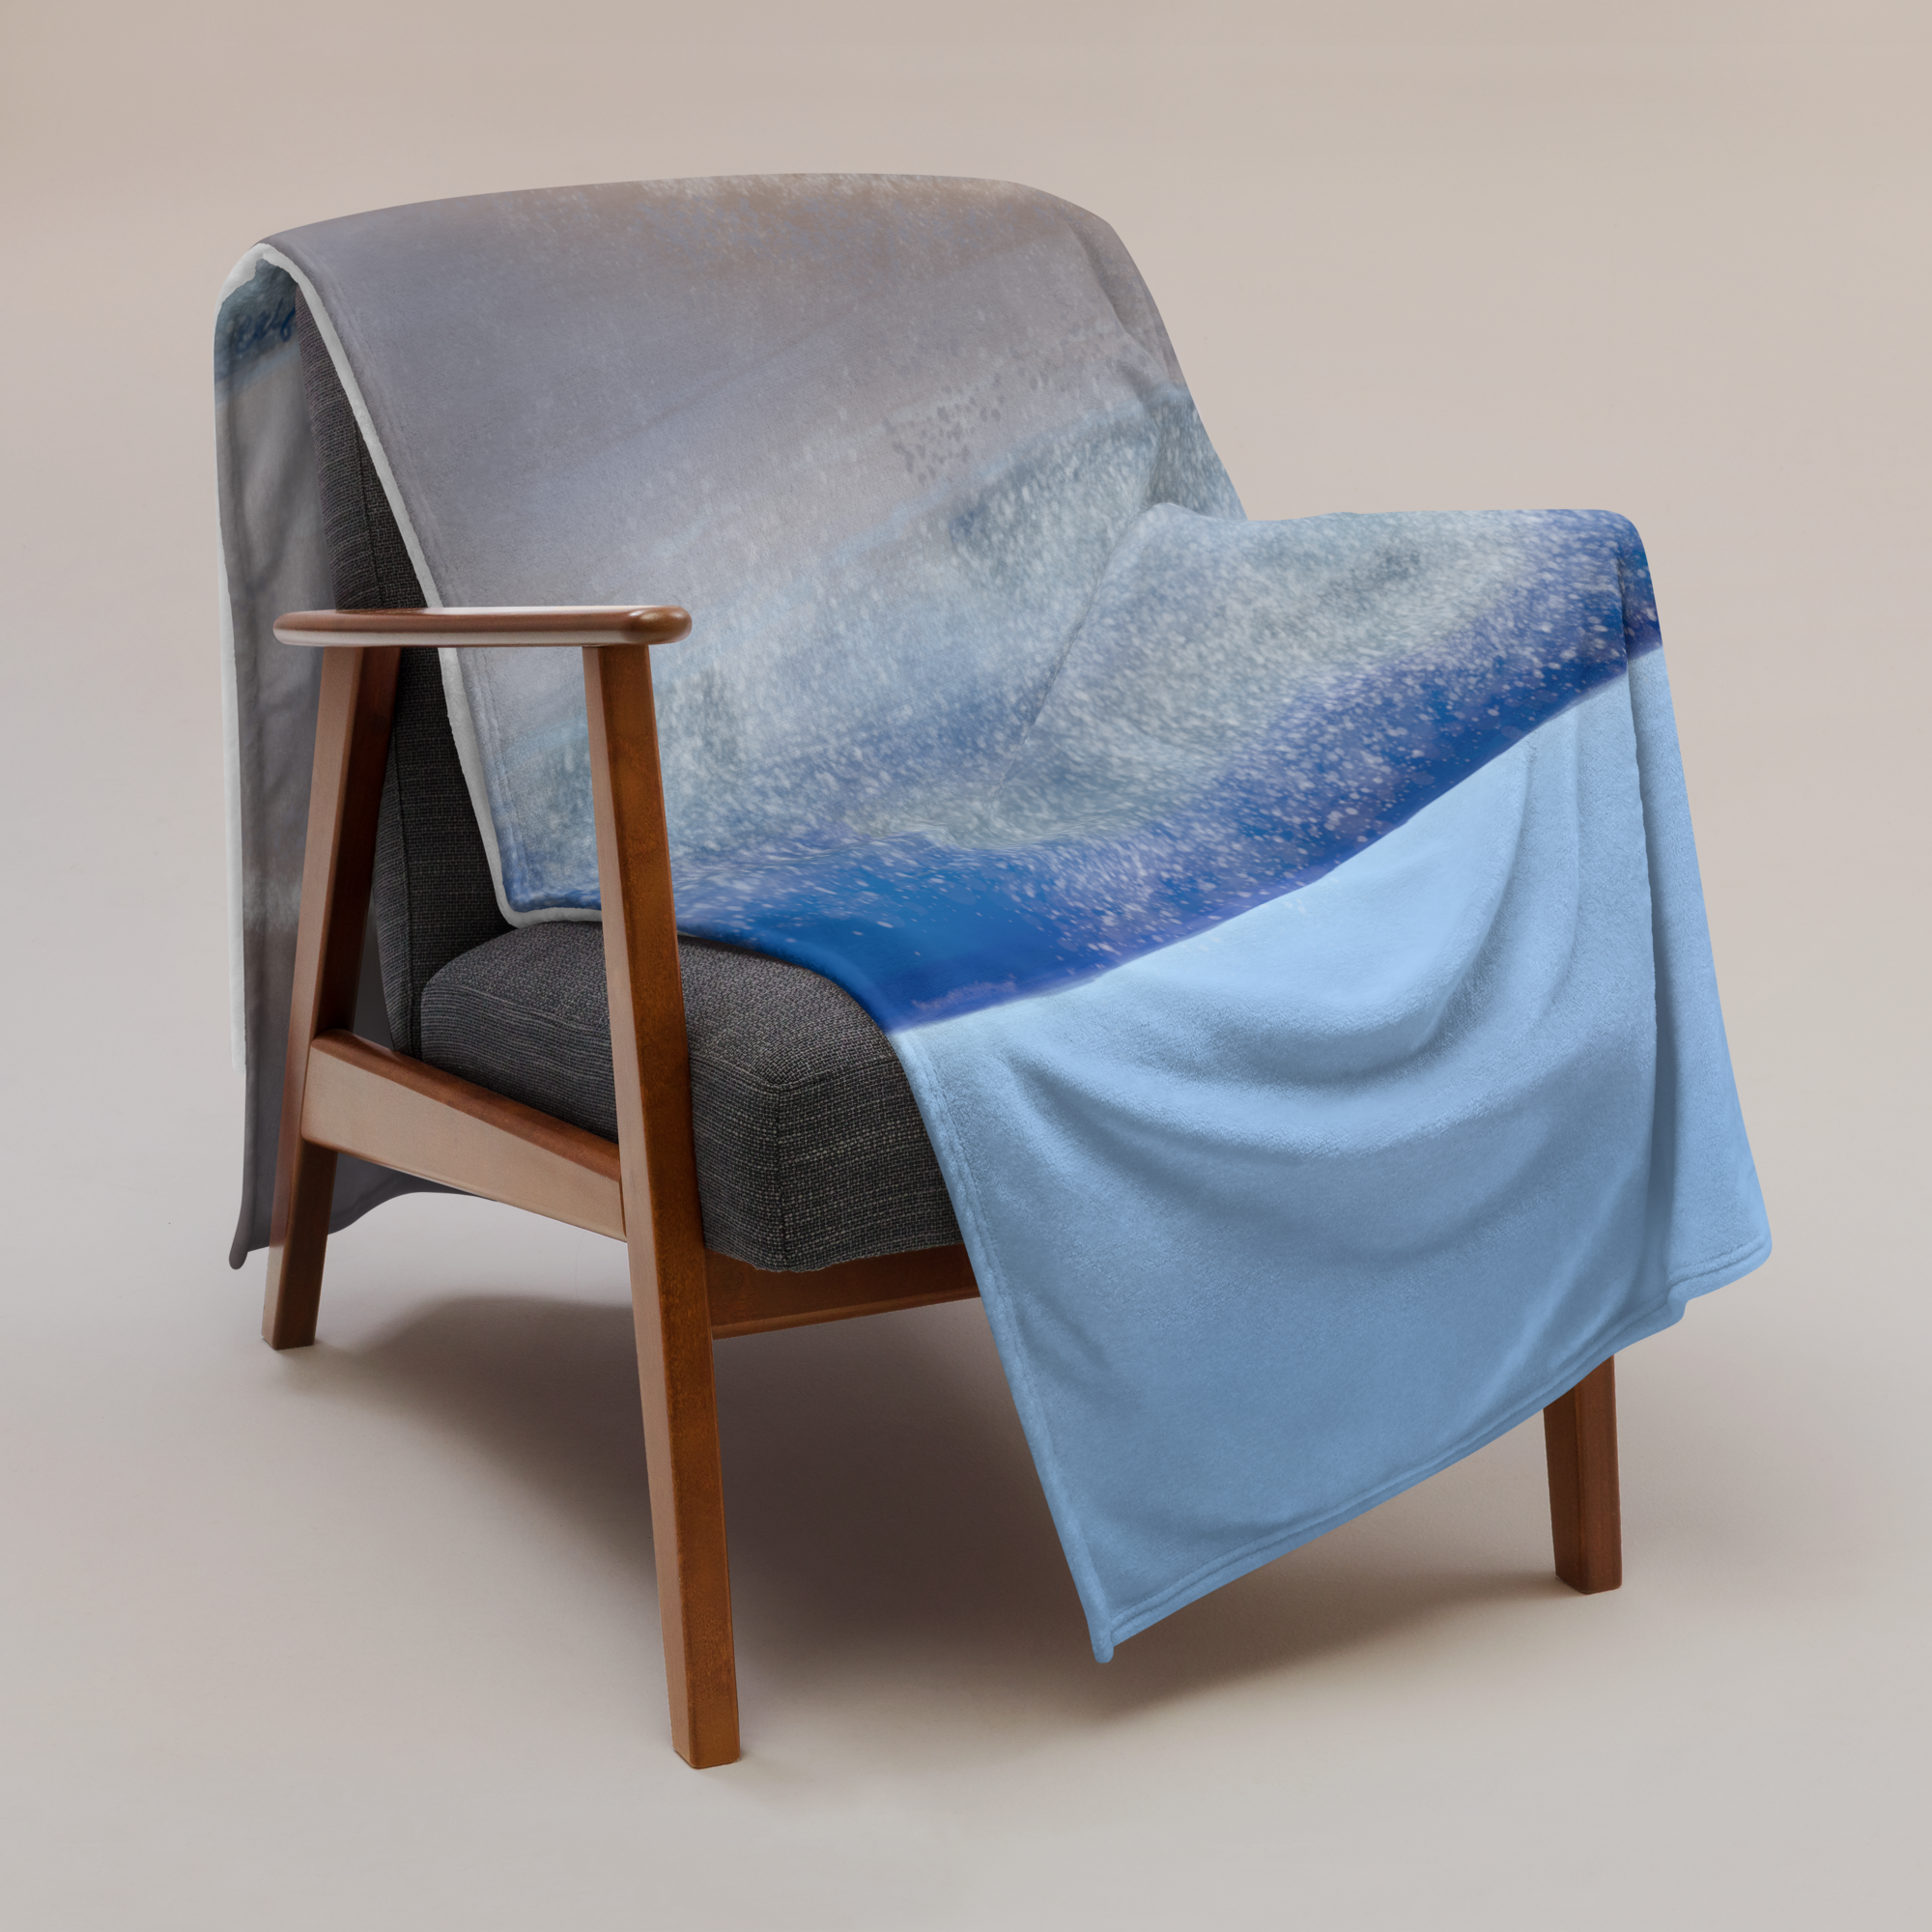 image of blanket with 'Waves of Love' printed on it draped over a chair